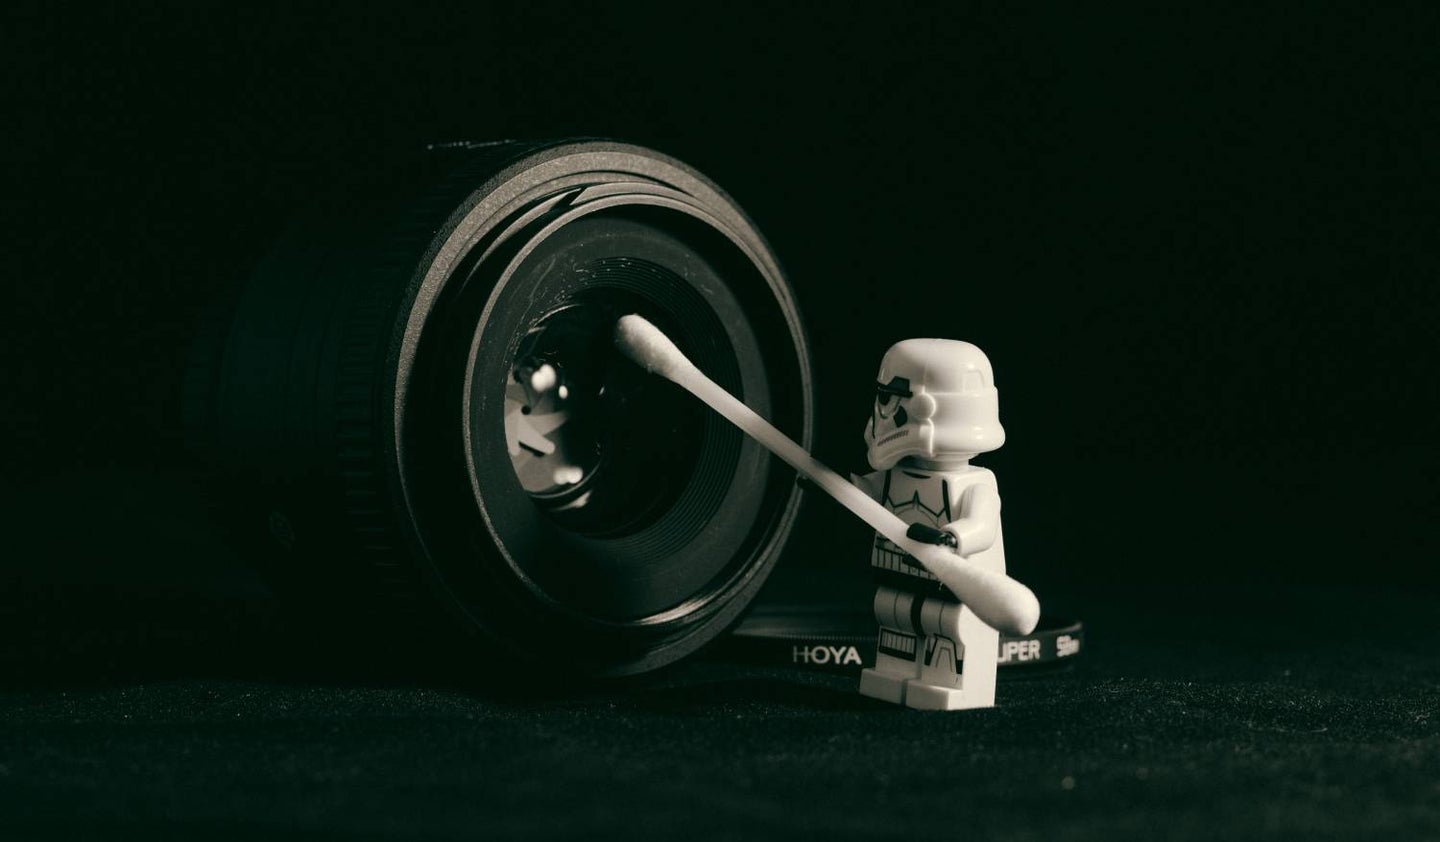 Star Wars Lego figurine cleaning camera lens